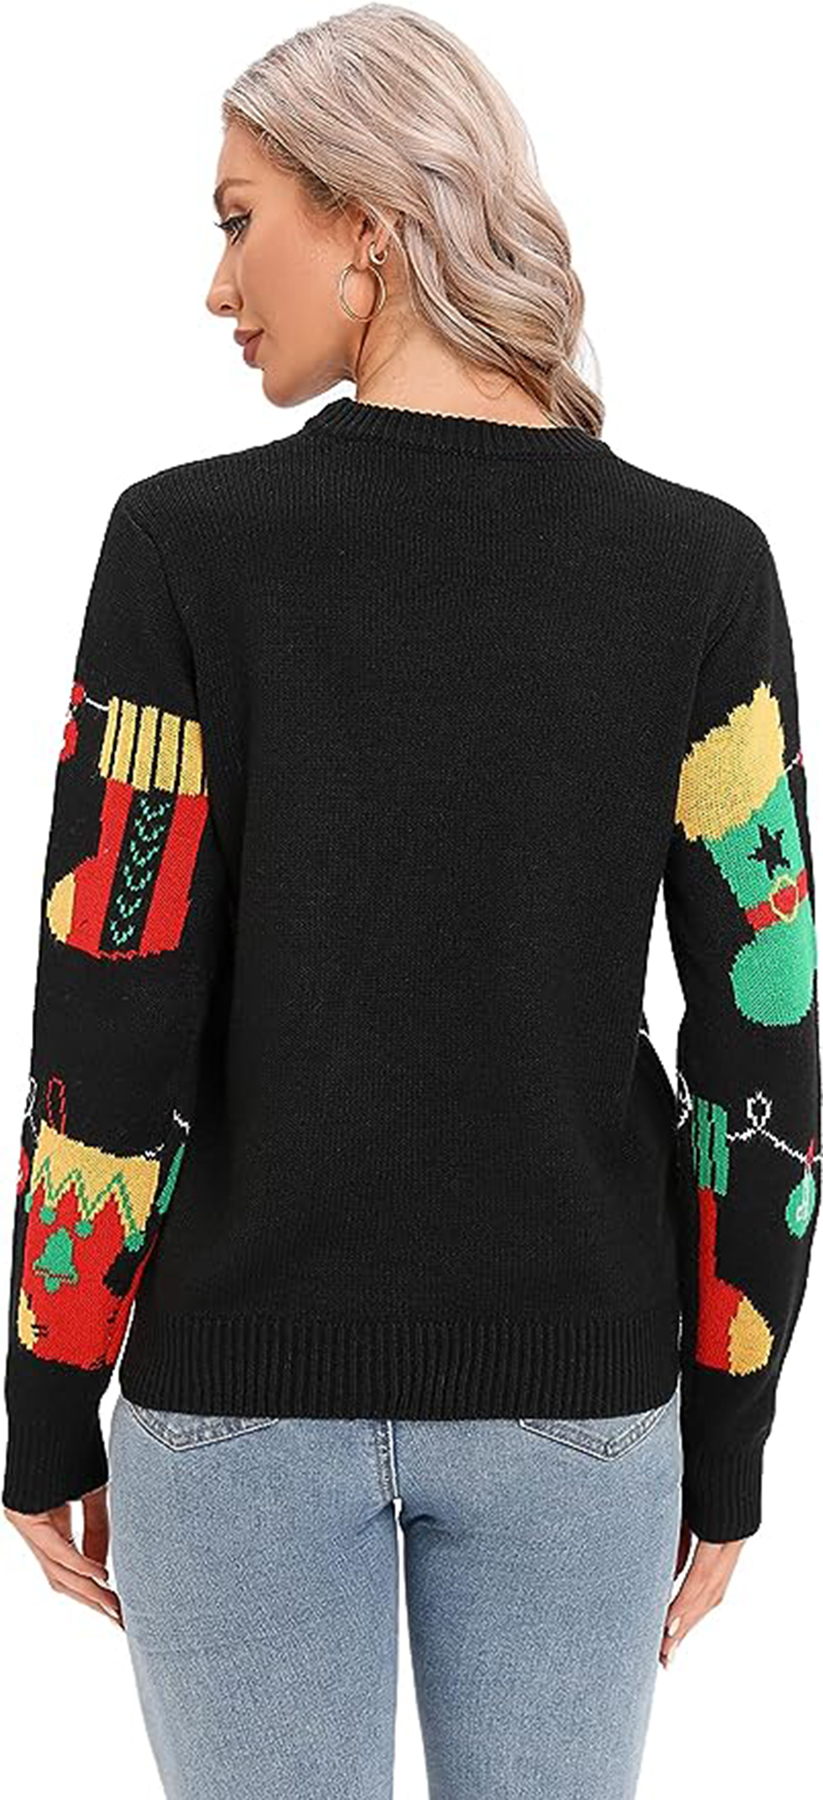  Ugly Christmas Sweaters for Women Men